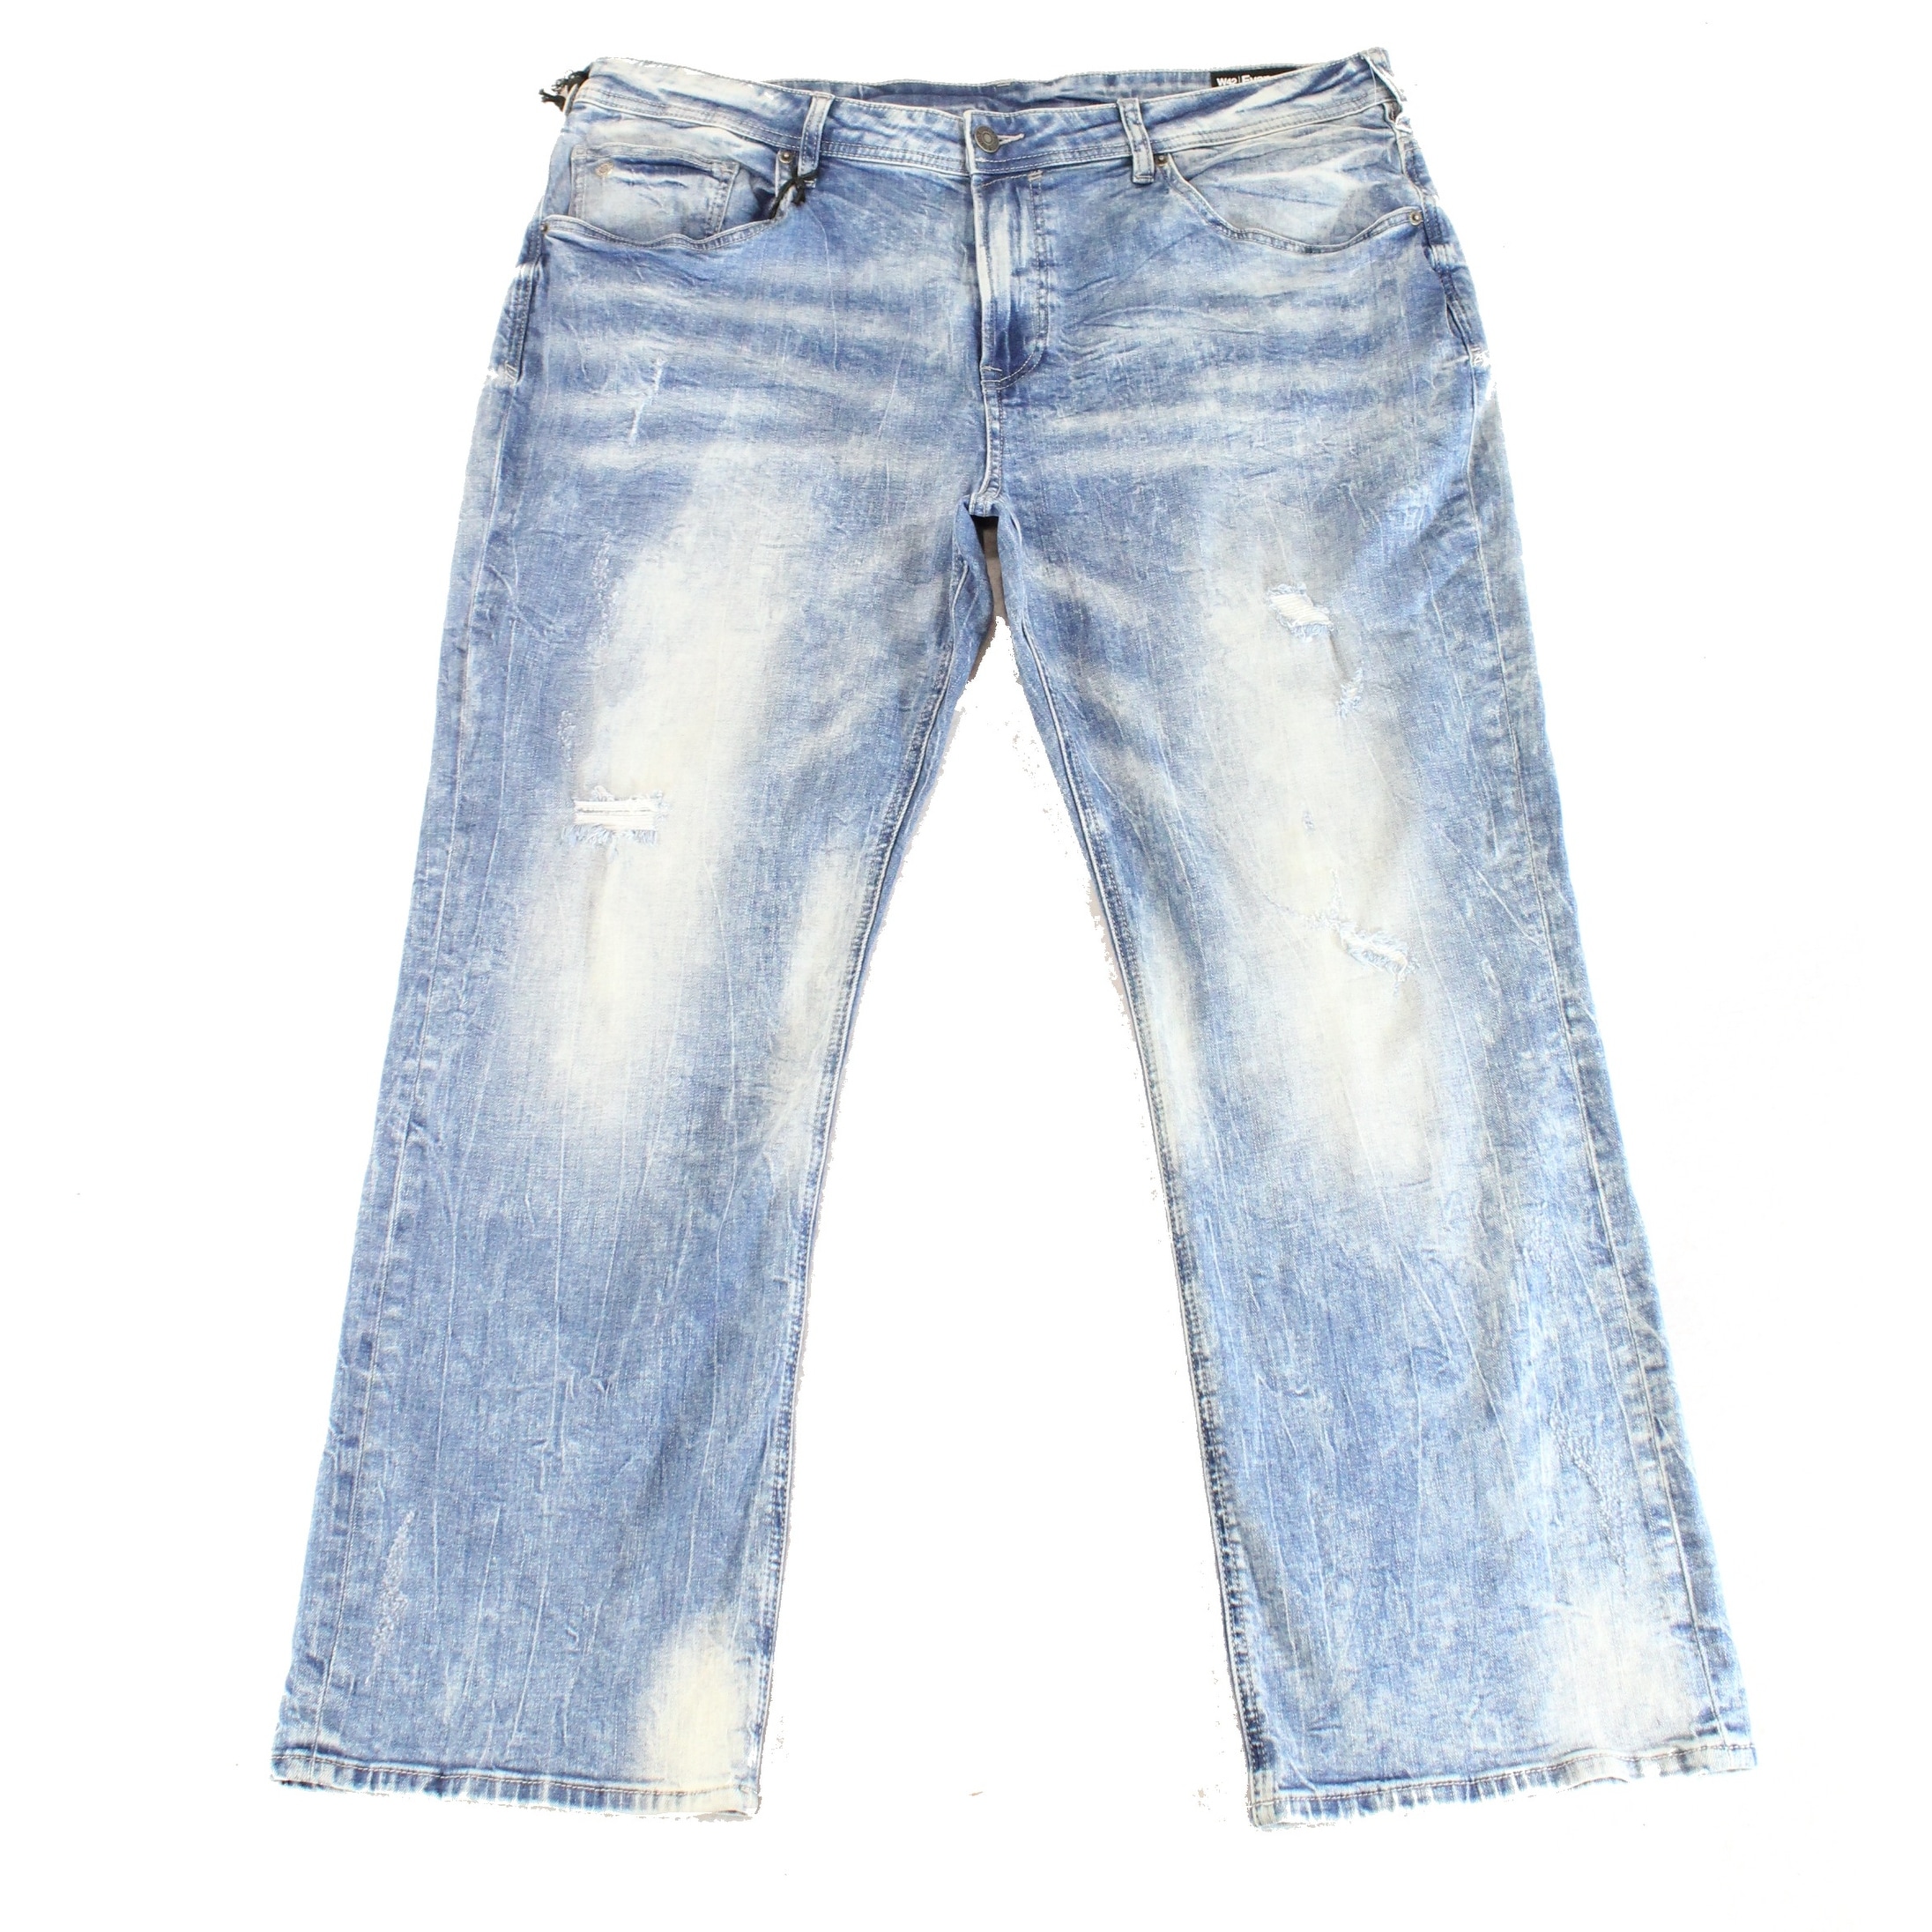 size 42 distressed jeans